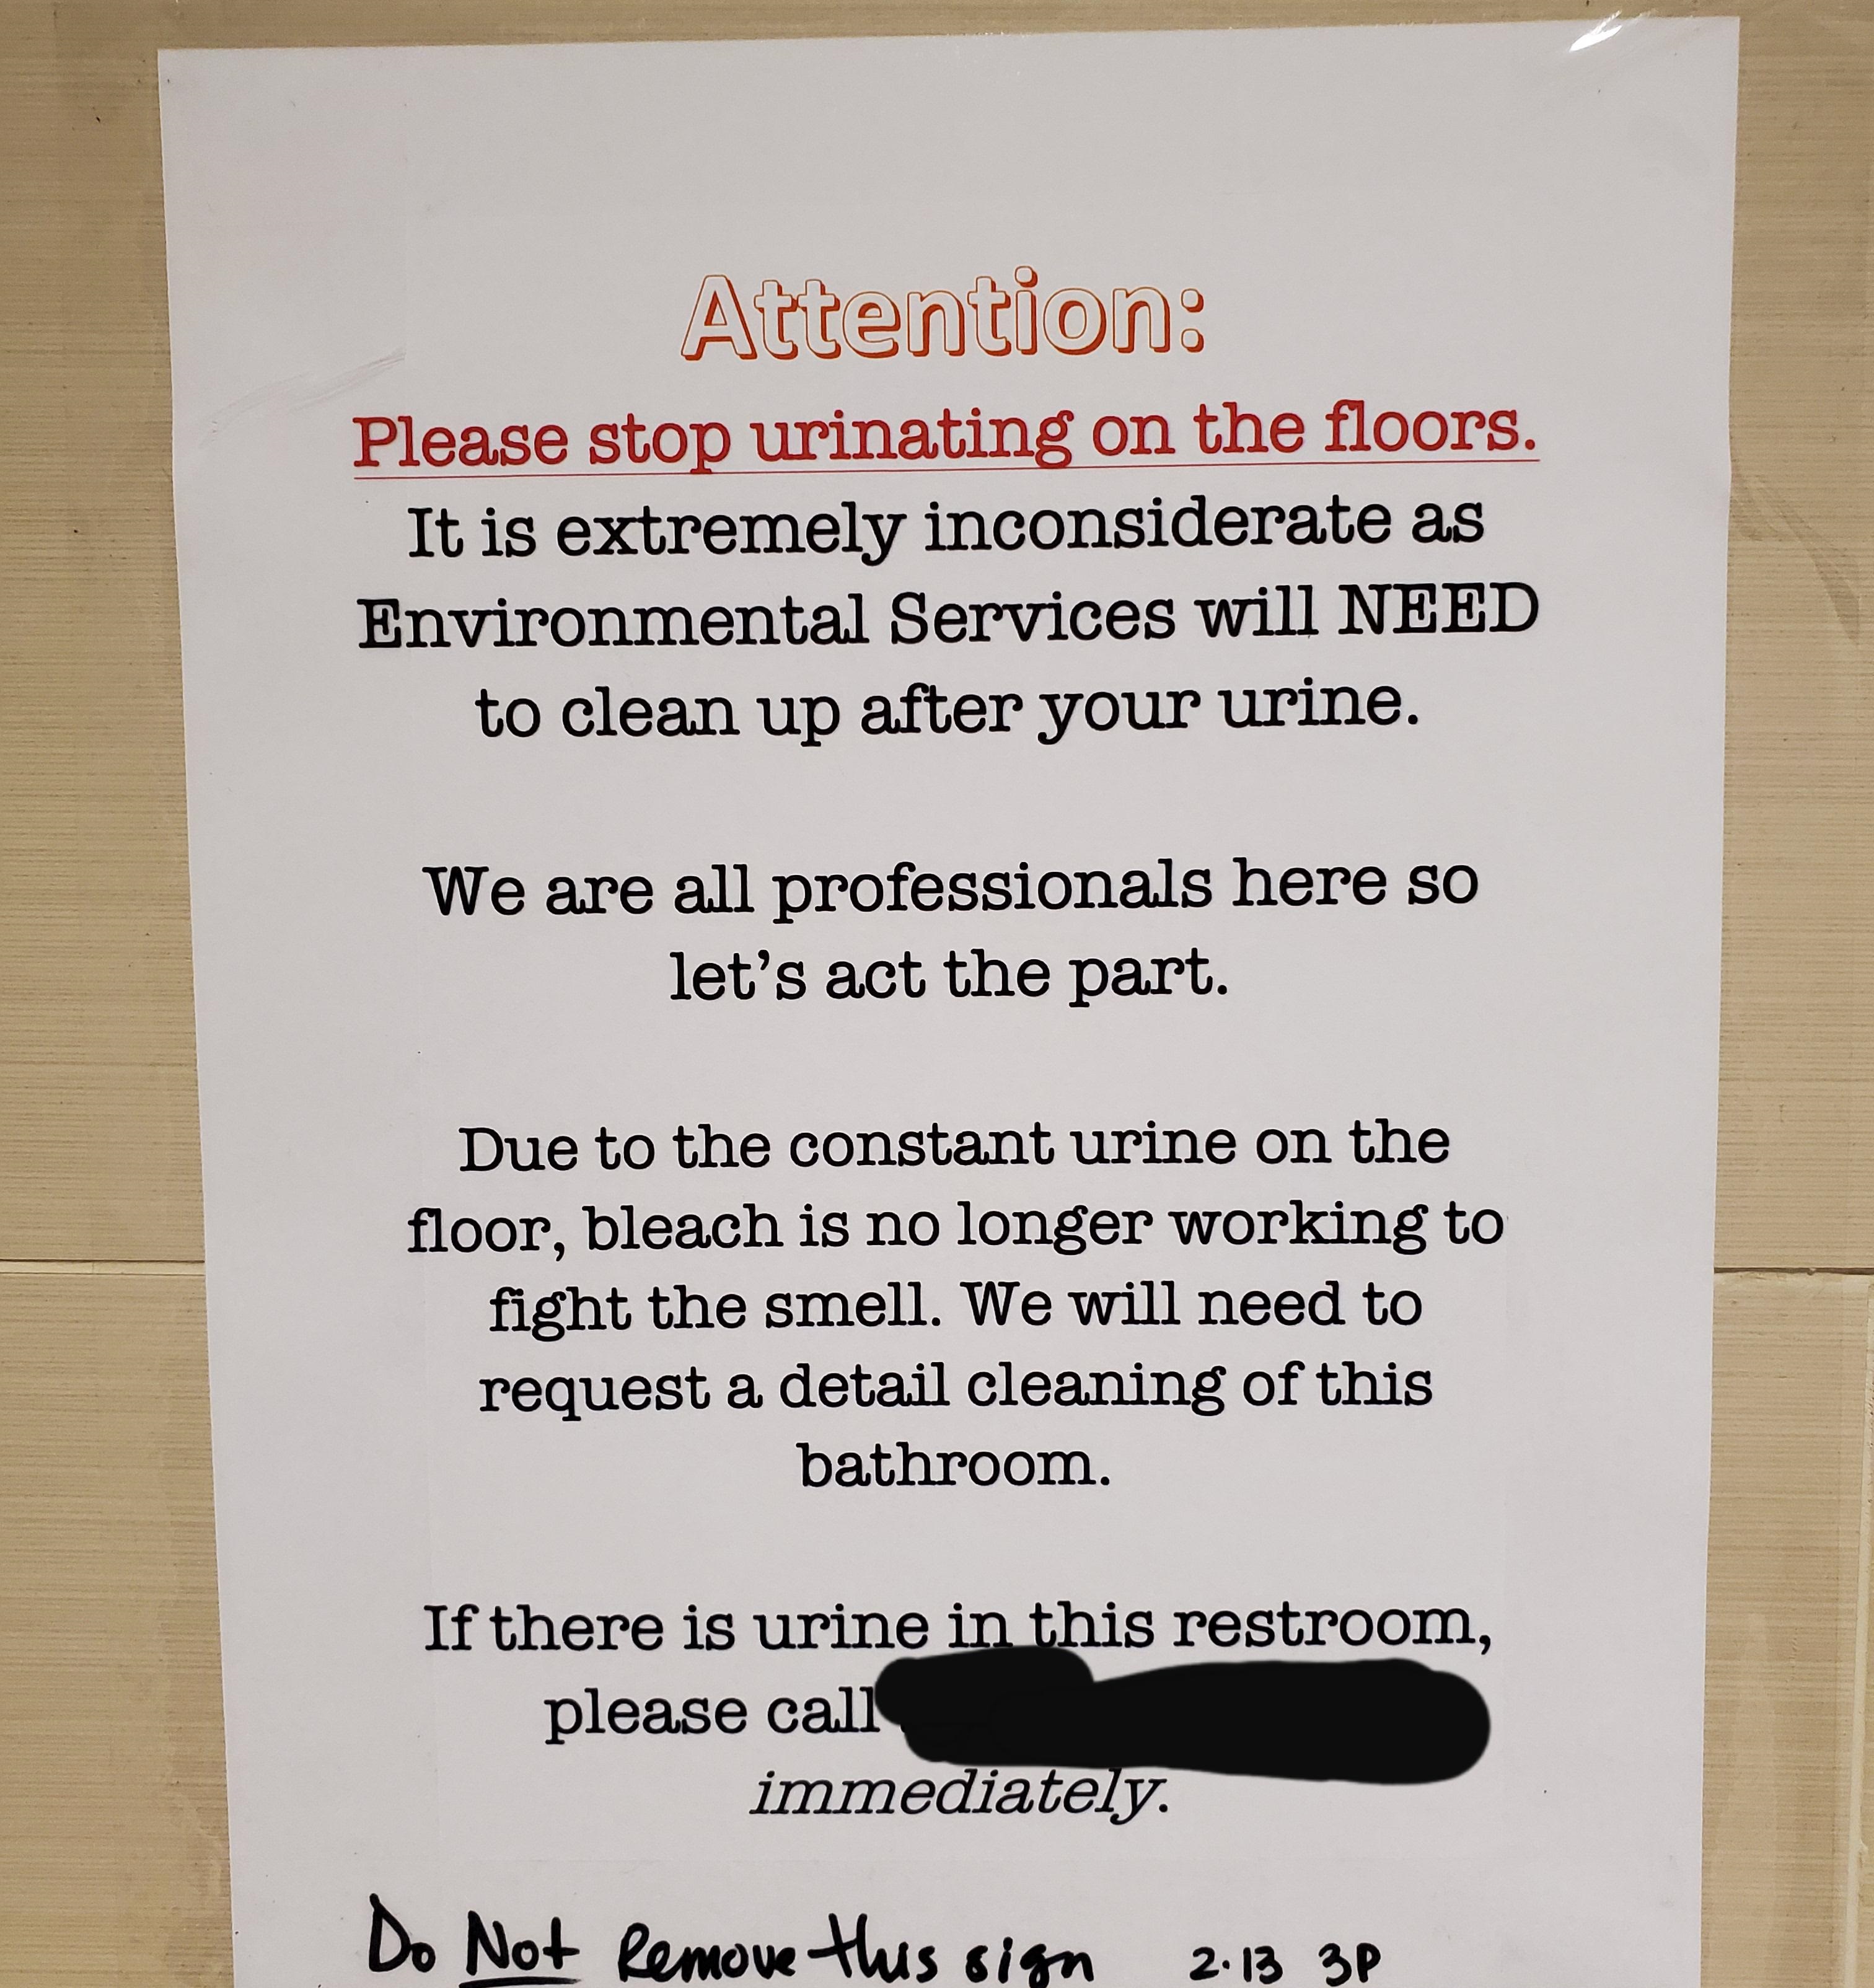 writing - Attention Please stop urinating on the floors. It is extremely inconsiderate as Environmental Services will Need to clean up after your urine. We are all professionals here so let's act the part. Due to the constant urine on the floor, bleach is